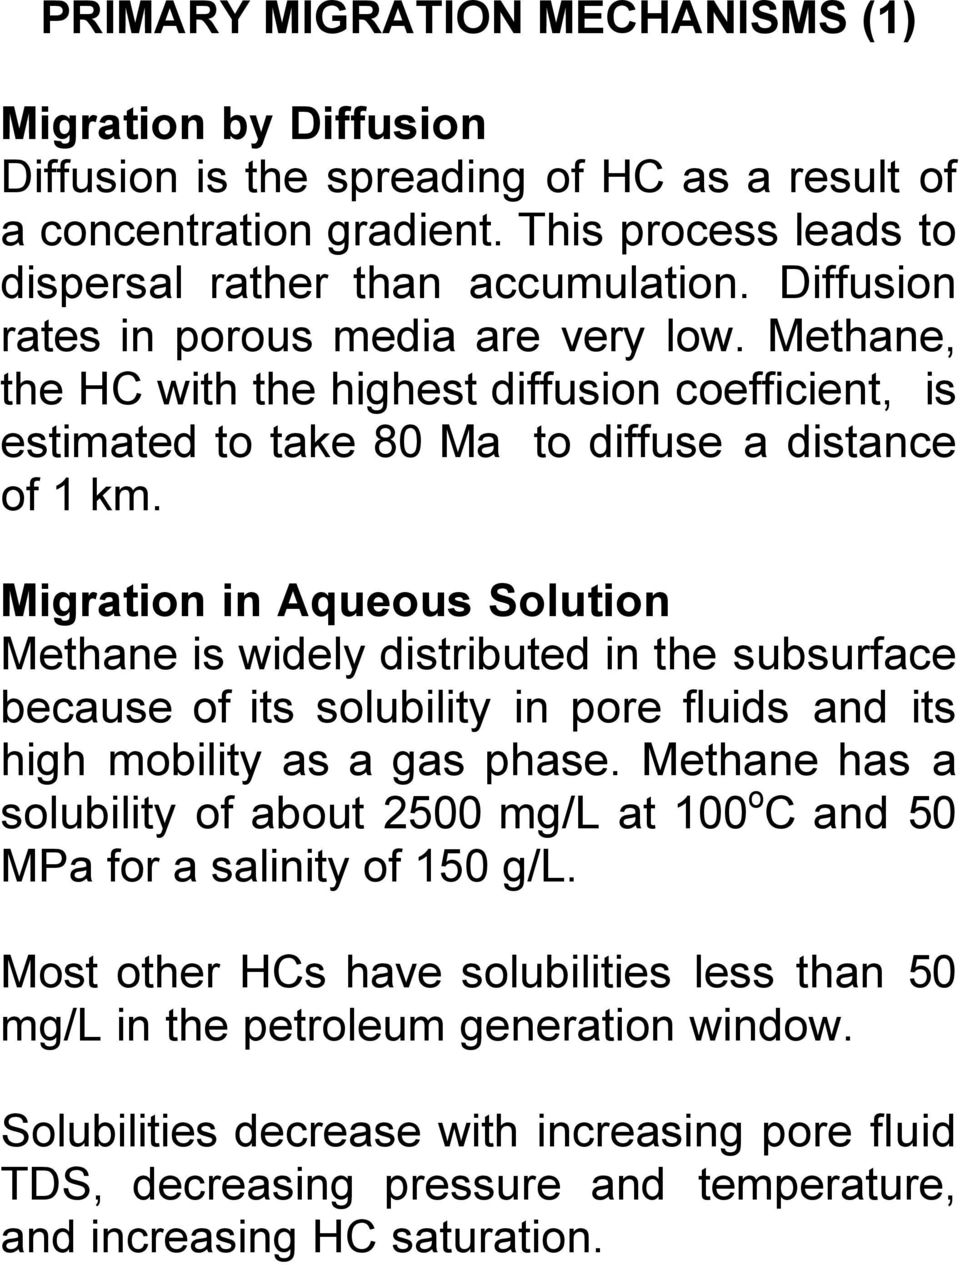 Migration in Aqueous Solution Methane is widely distributed in the subsurface because of its solubility in pore fluids and its high mobility as a gas phase.